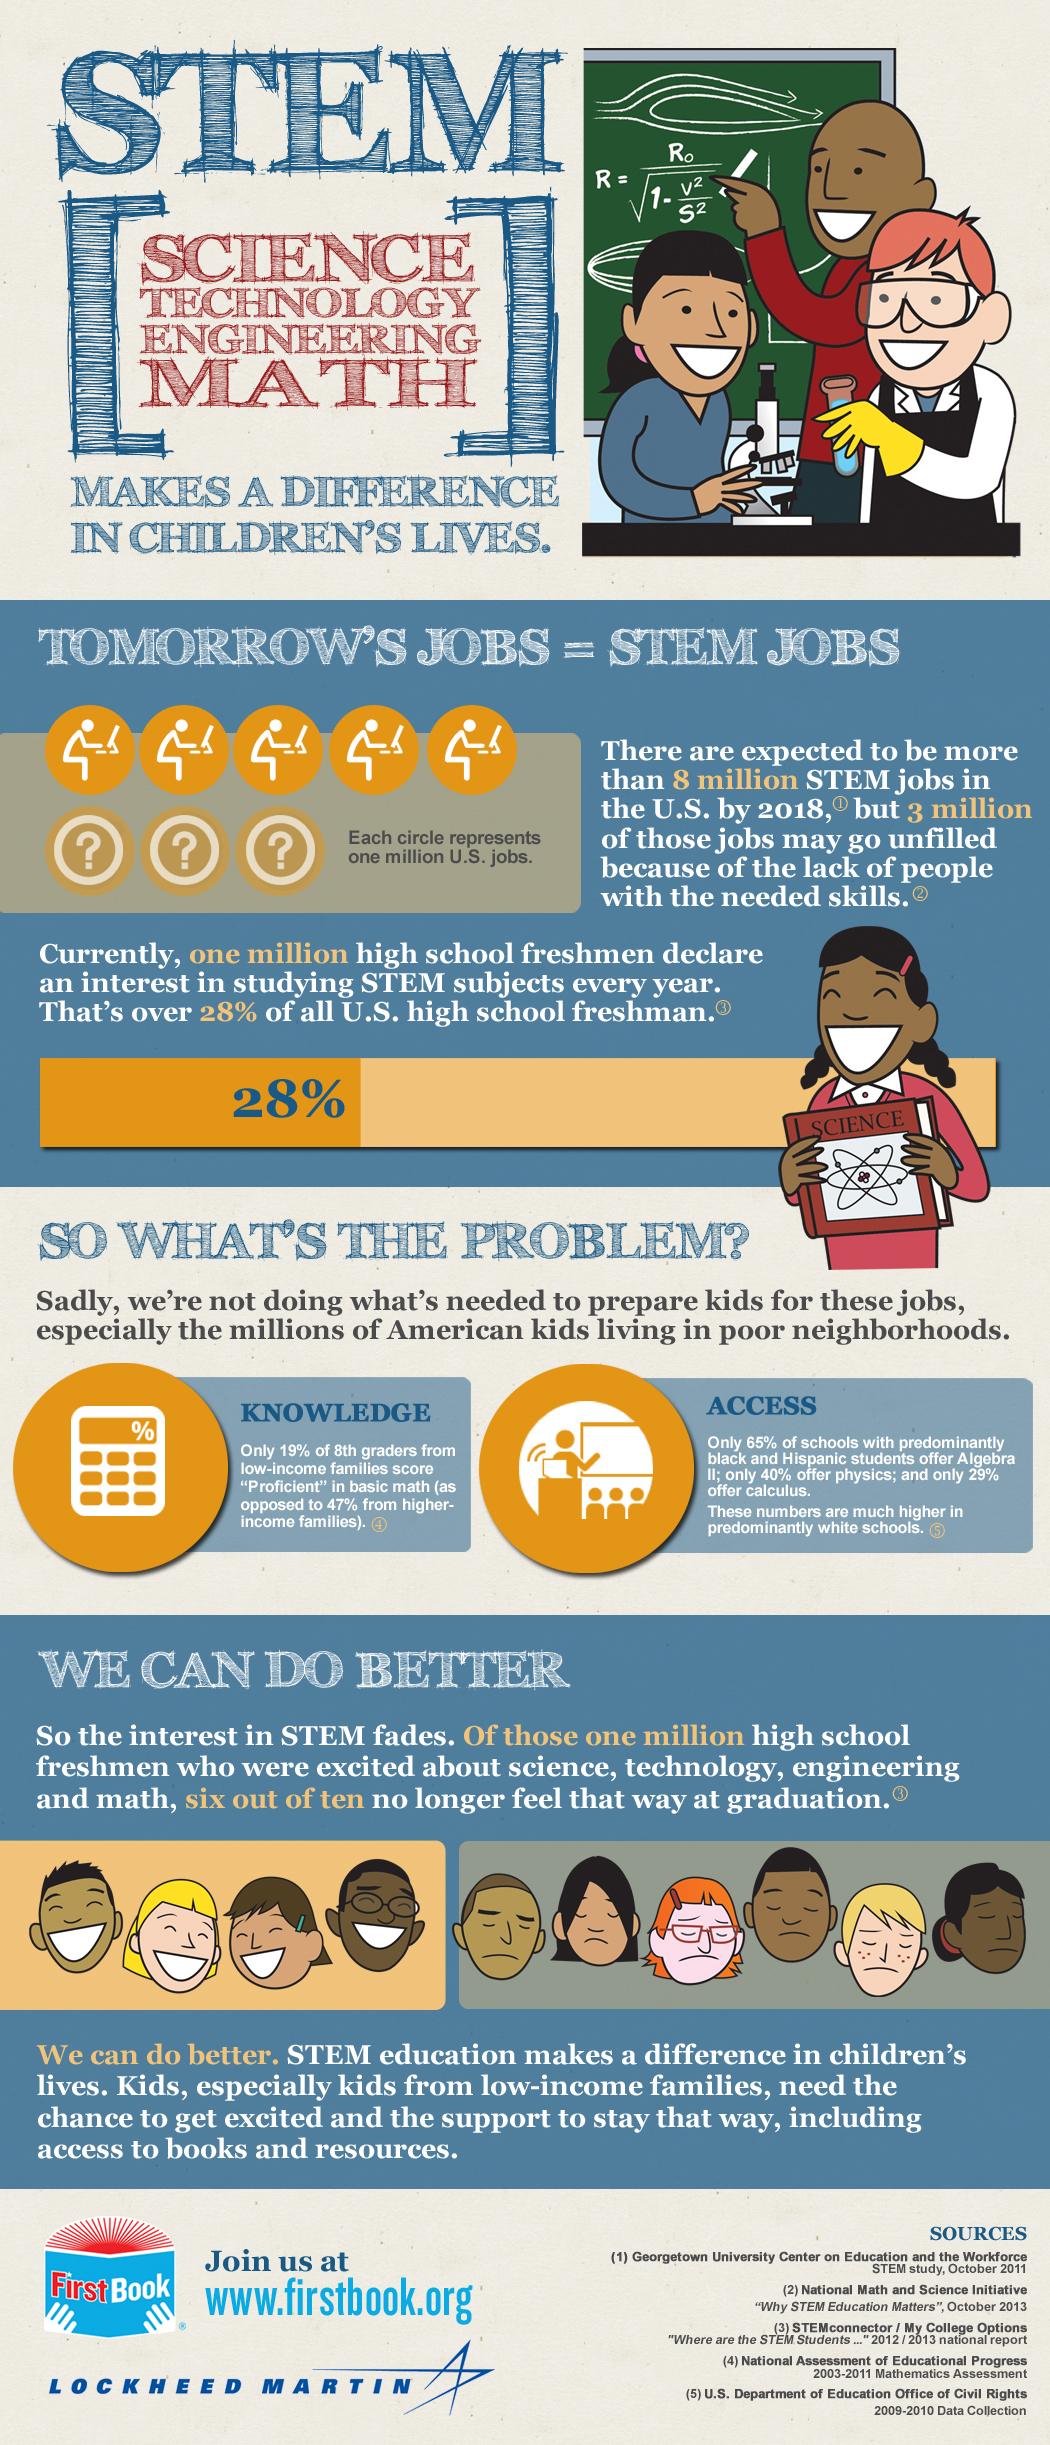 [INFOGRAPHIC] STEM Education Makes a Difference in Children's Lives